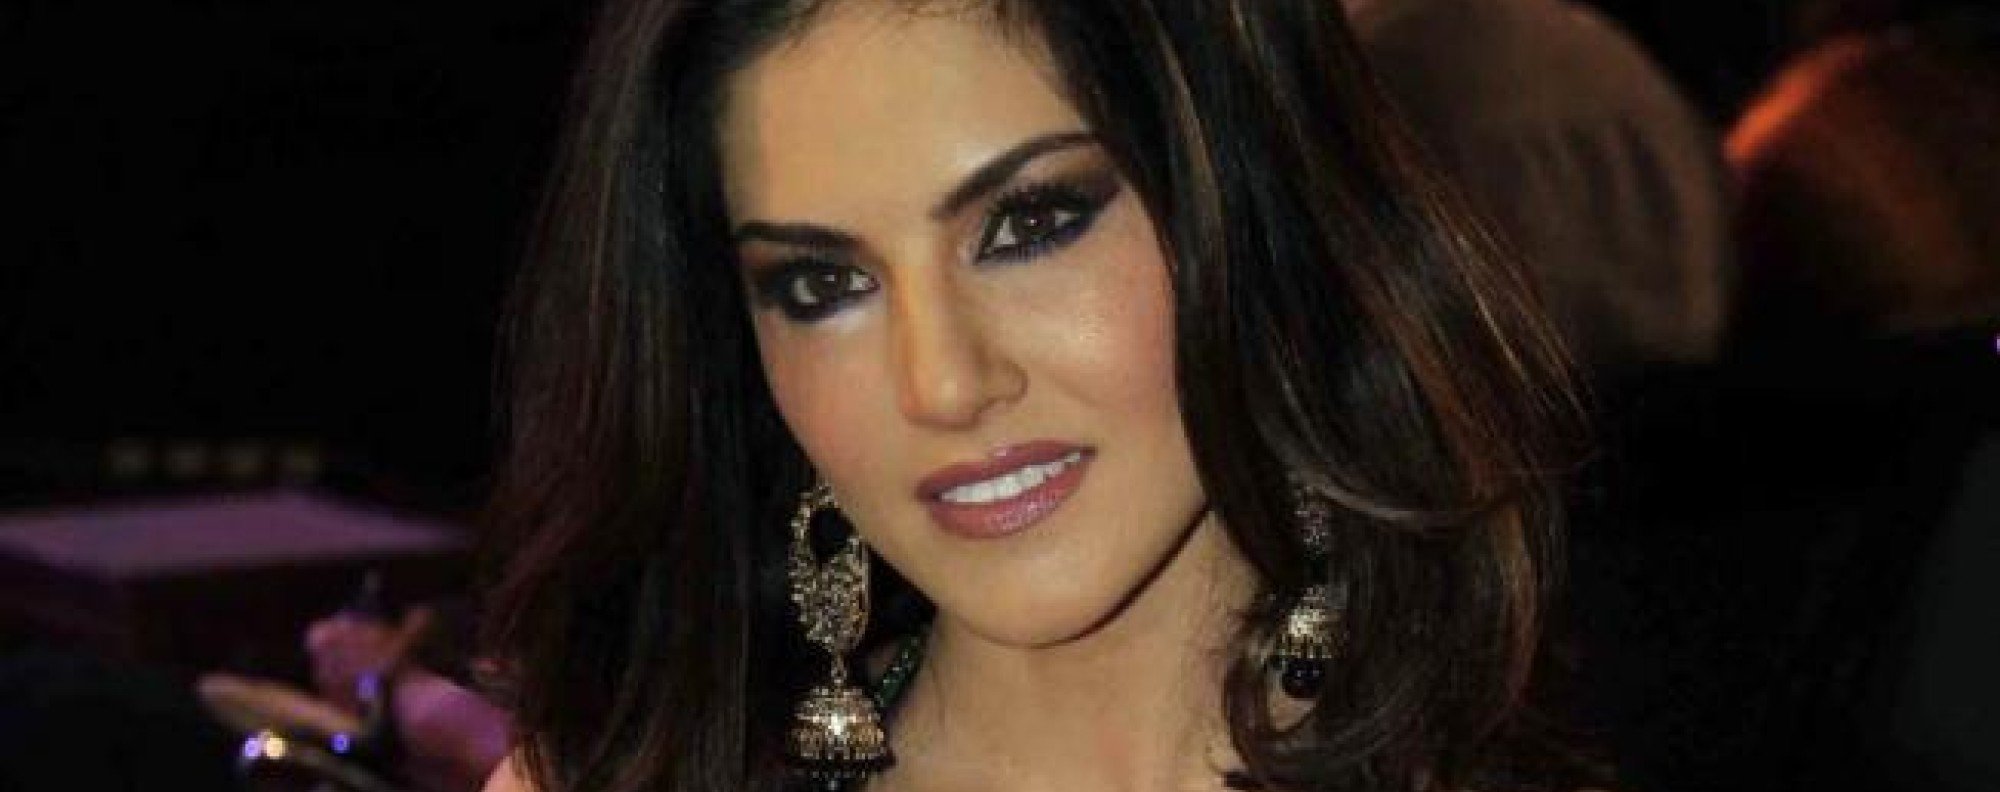 Xxx Sex Rep Video - Rape crisis in India leads to calls for porn star Sunny Leone to be jailed  | South China Morning Post